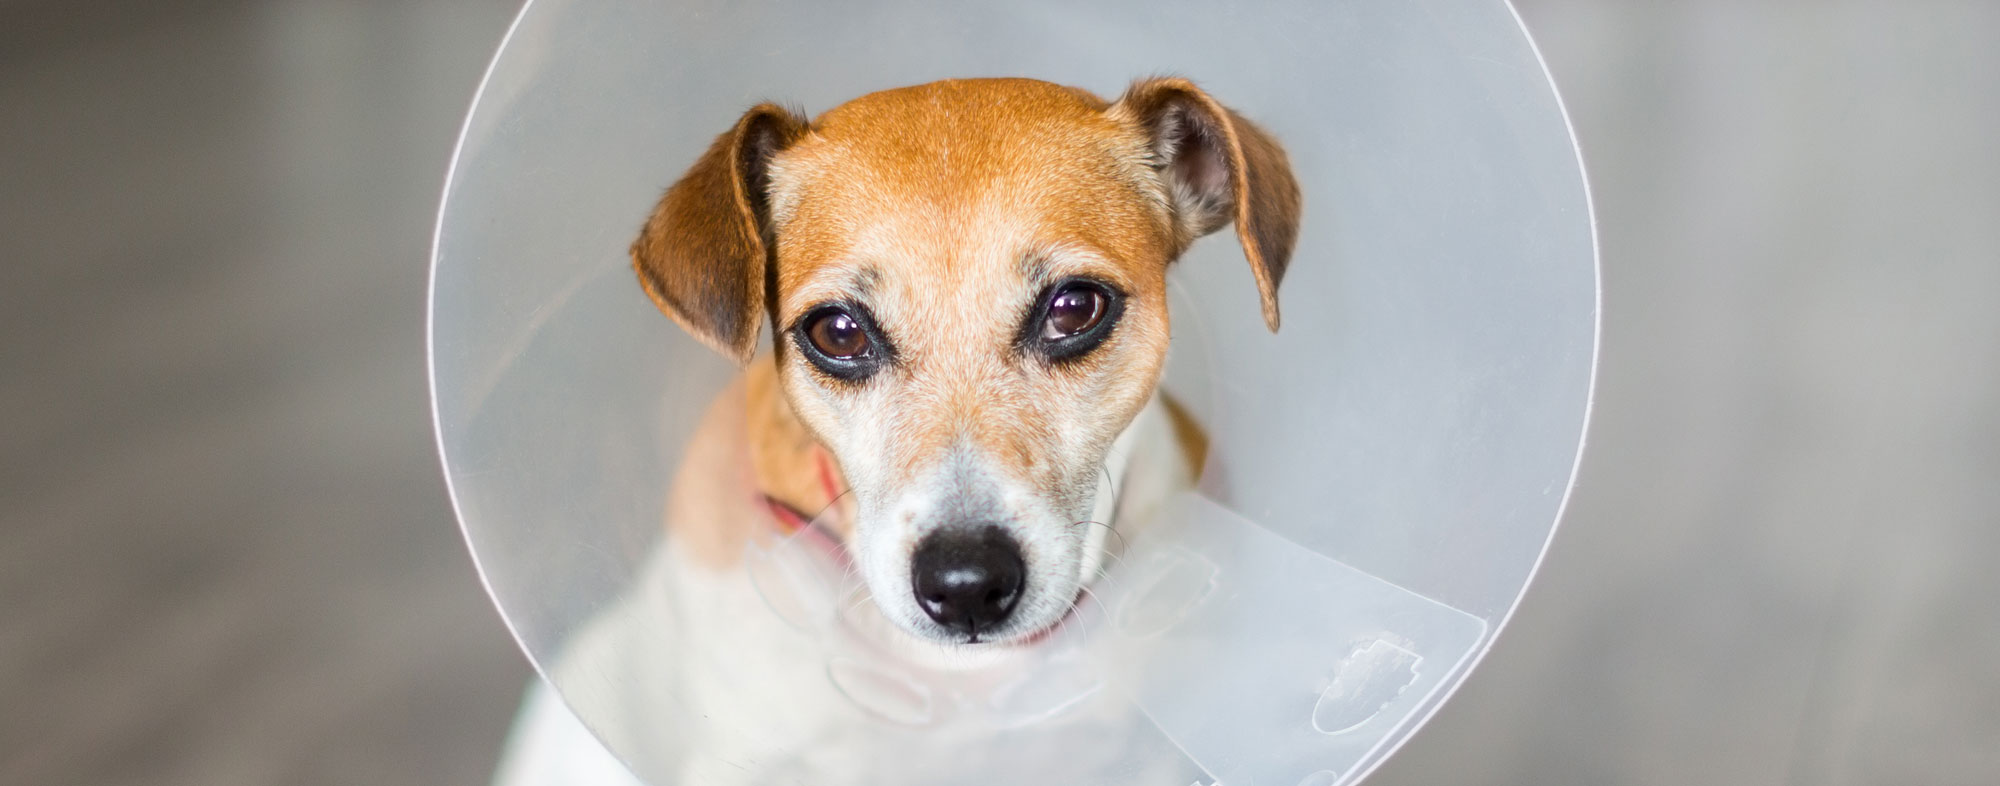 After surgery, your dog can wear a cone, or an alternative